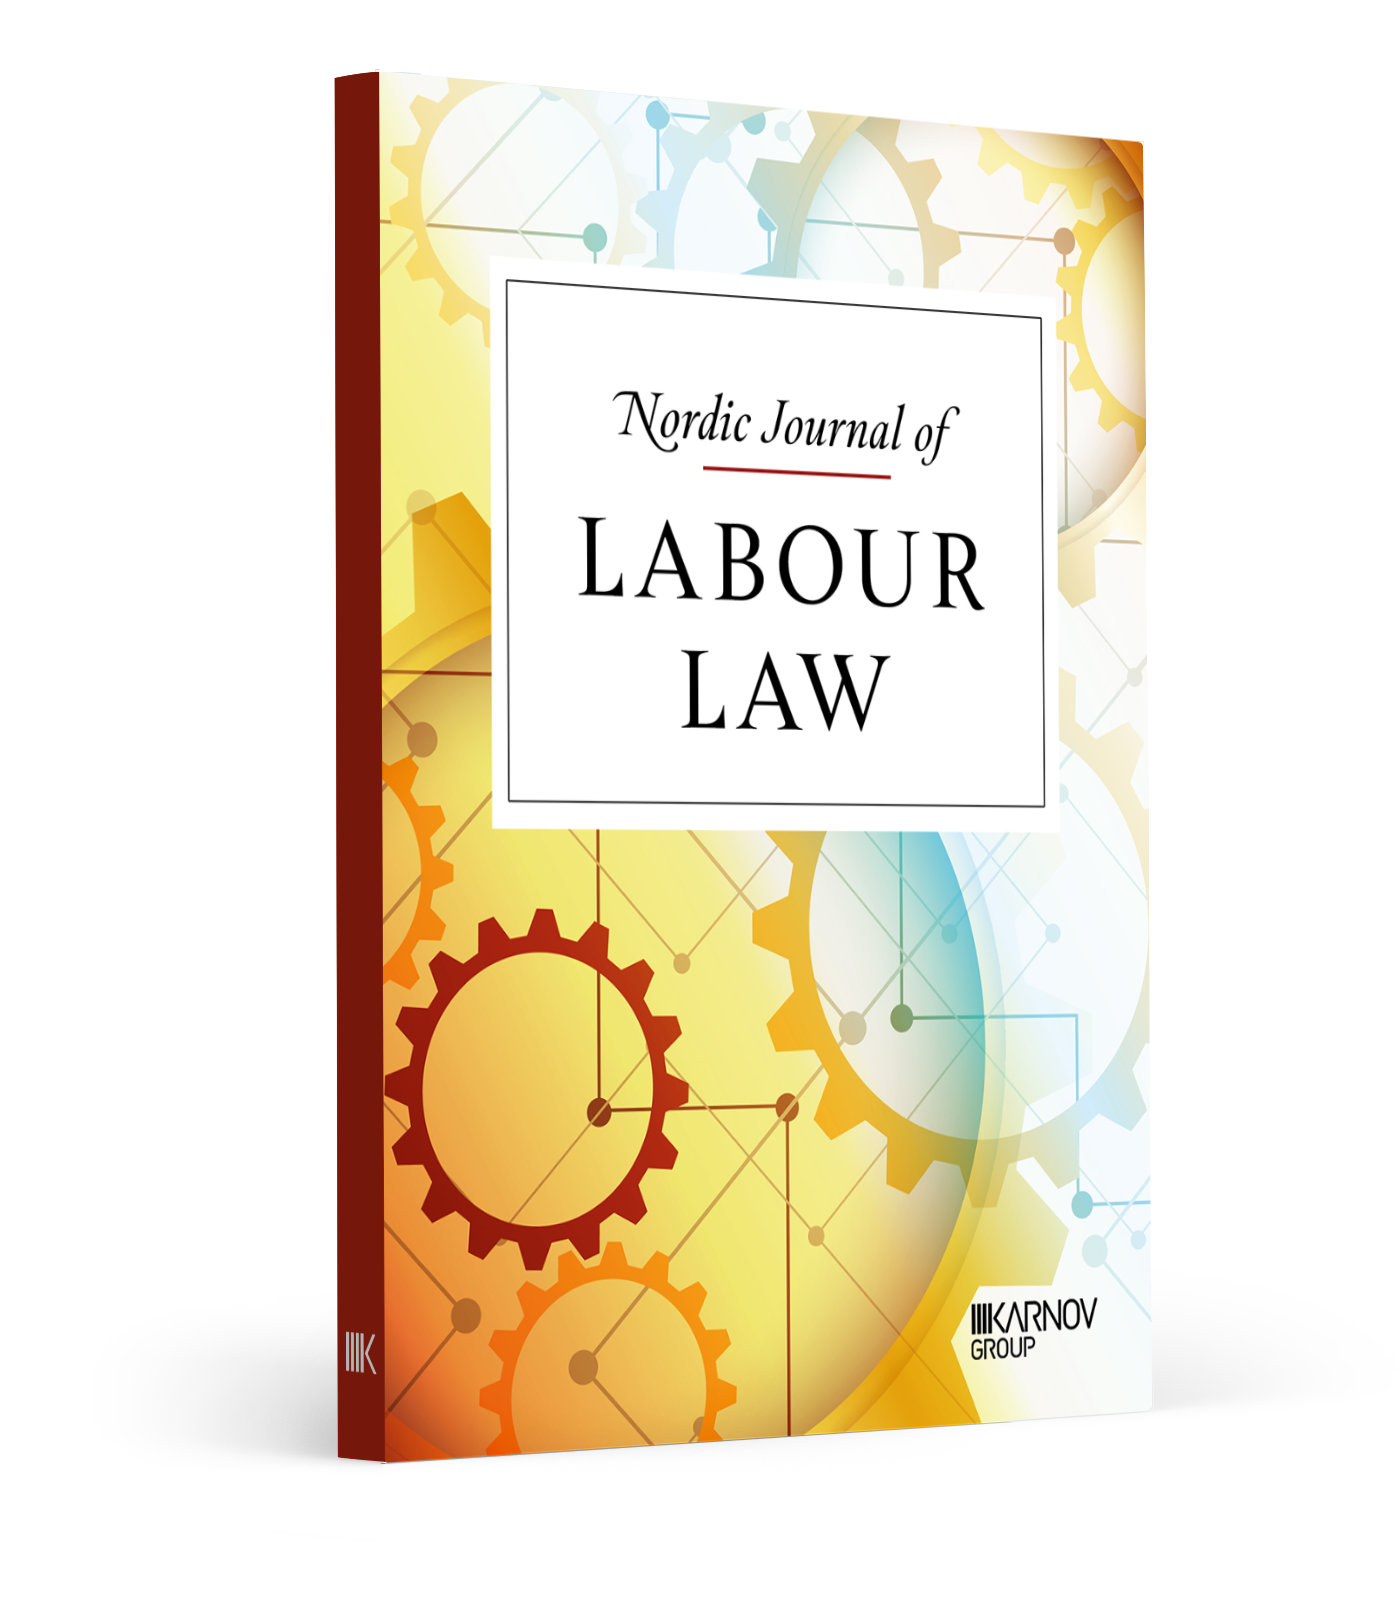 Nordic-journal-of-labour-law-1-jpg